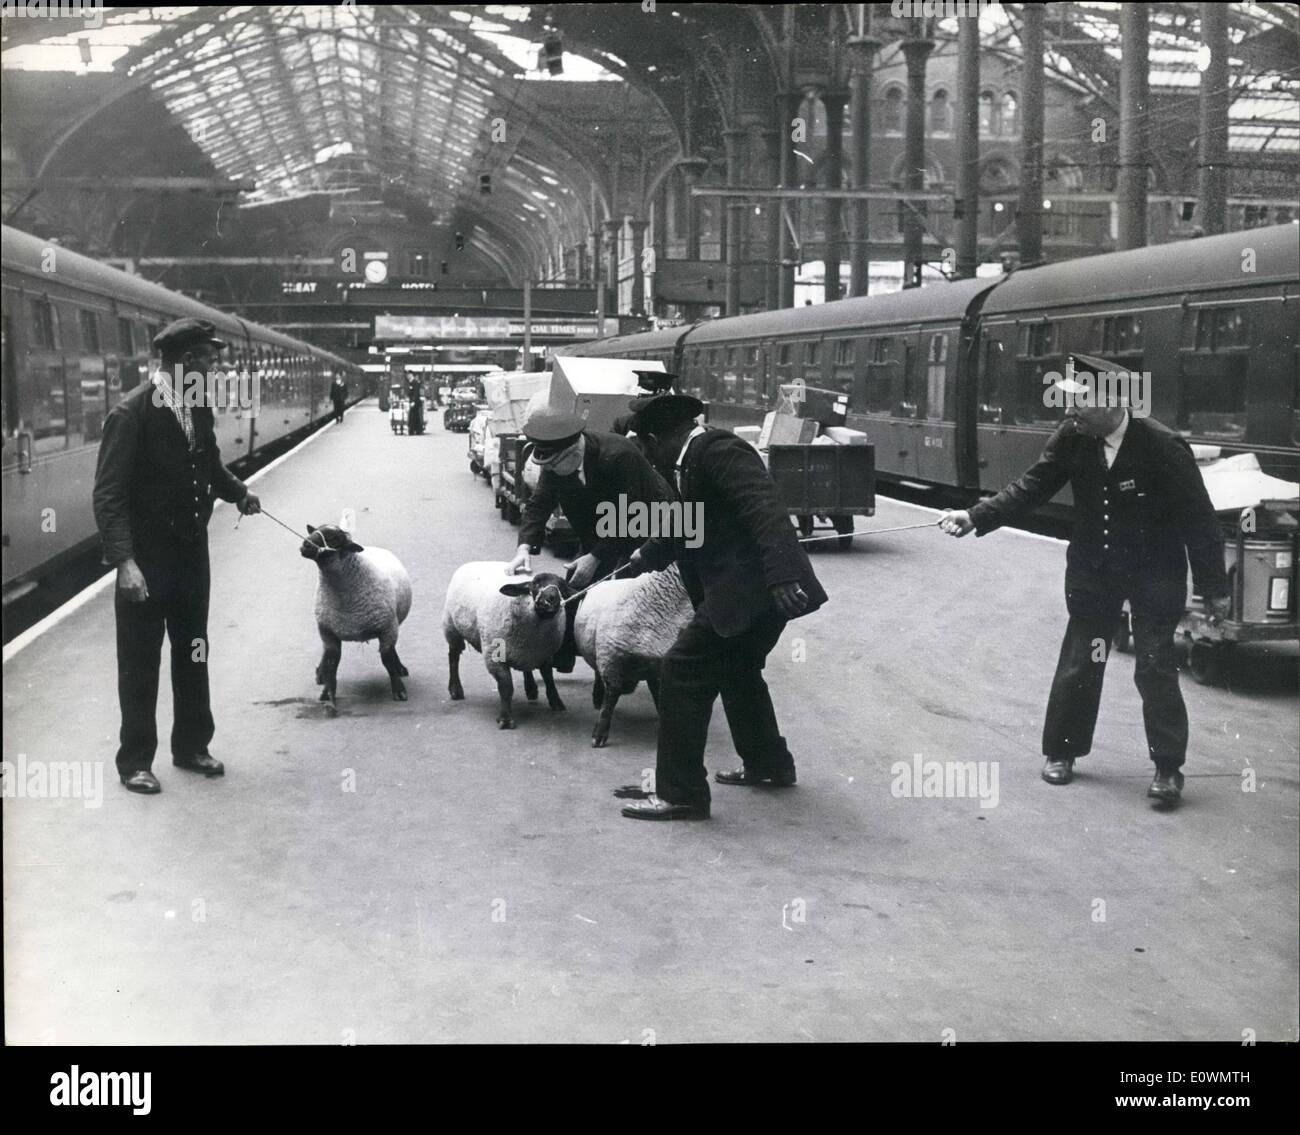 Aug. 08, 1963 - The Reluctant Rams.: When these three' woolly gentlemen' arrived at busy Liverpool Street Station in the heart of London, from their spacious country home, they took one look at the hustle and bustle, and listened to the noise of the city traffic for a few moments and decided to wait where they were and catch the next train home to the country. Unfortunately they only had one-way tickets, so the British Railways staff had to move in and despatch the reluctant rams to the waiting lorry Stock Photo